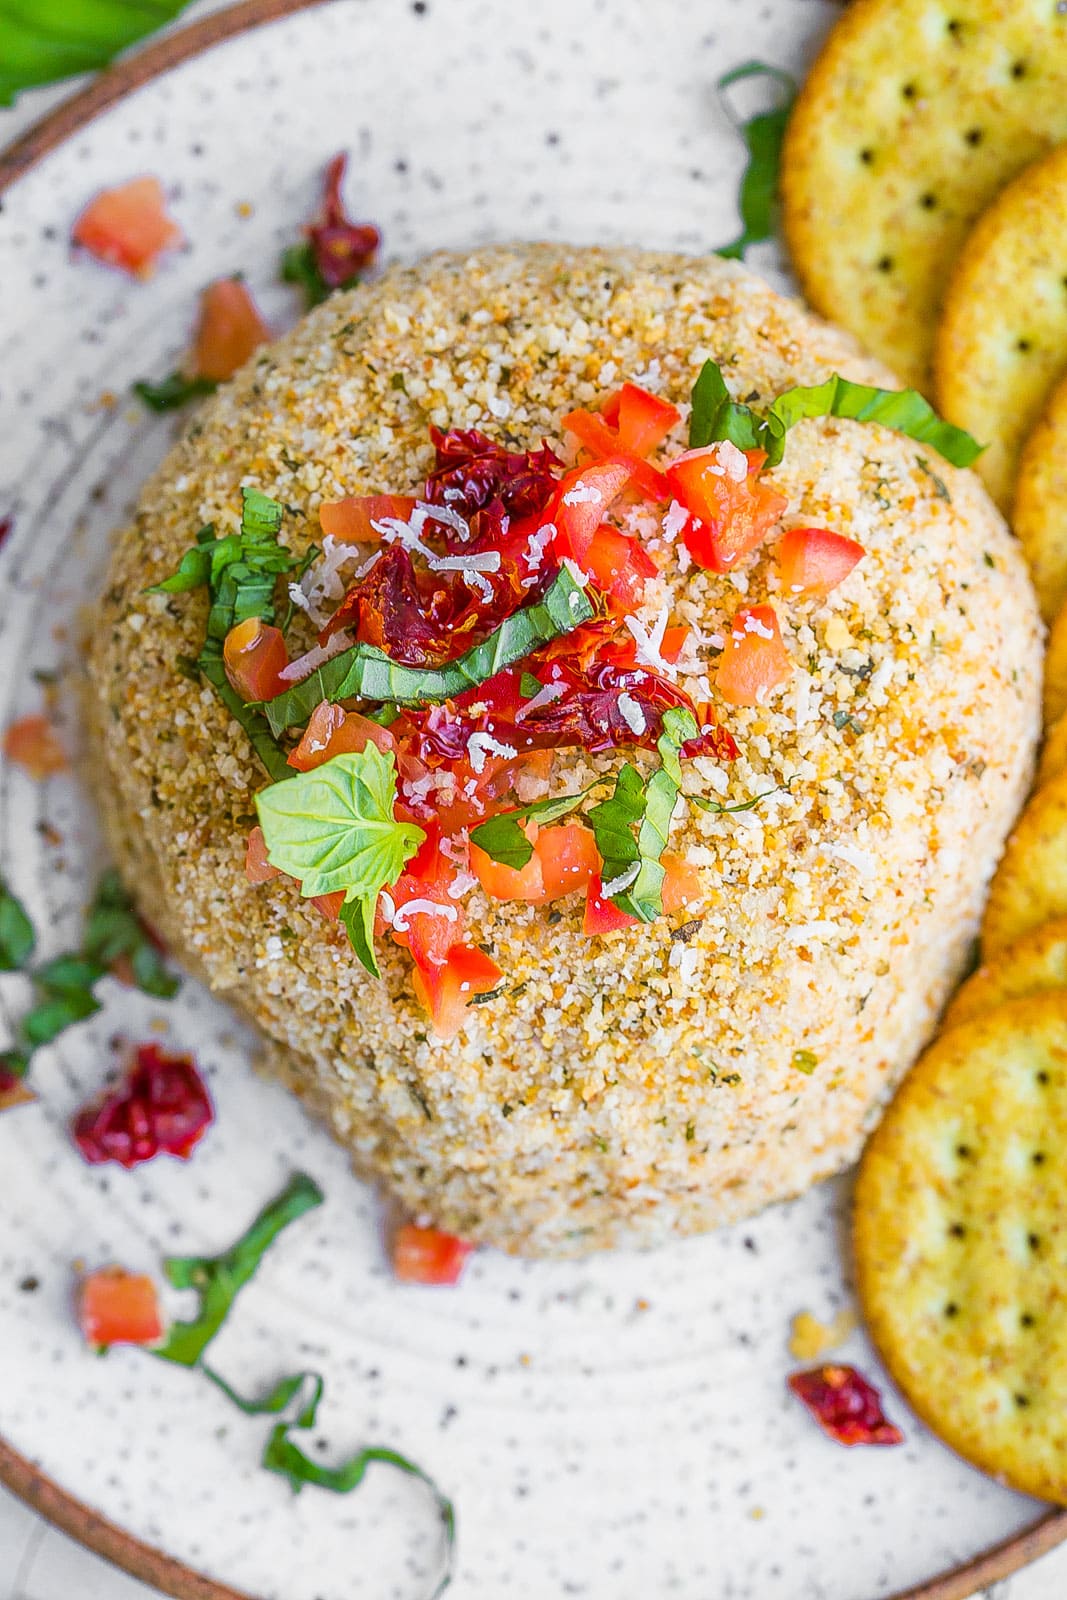 Top view of tomato basil cheese ball.